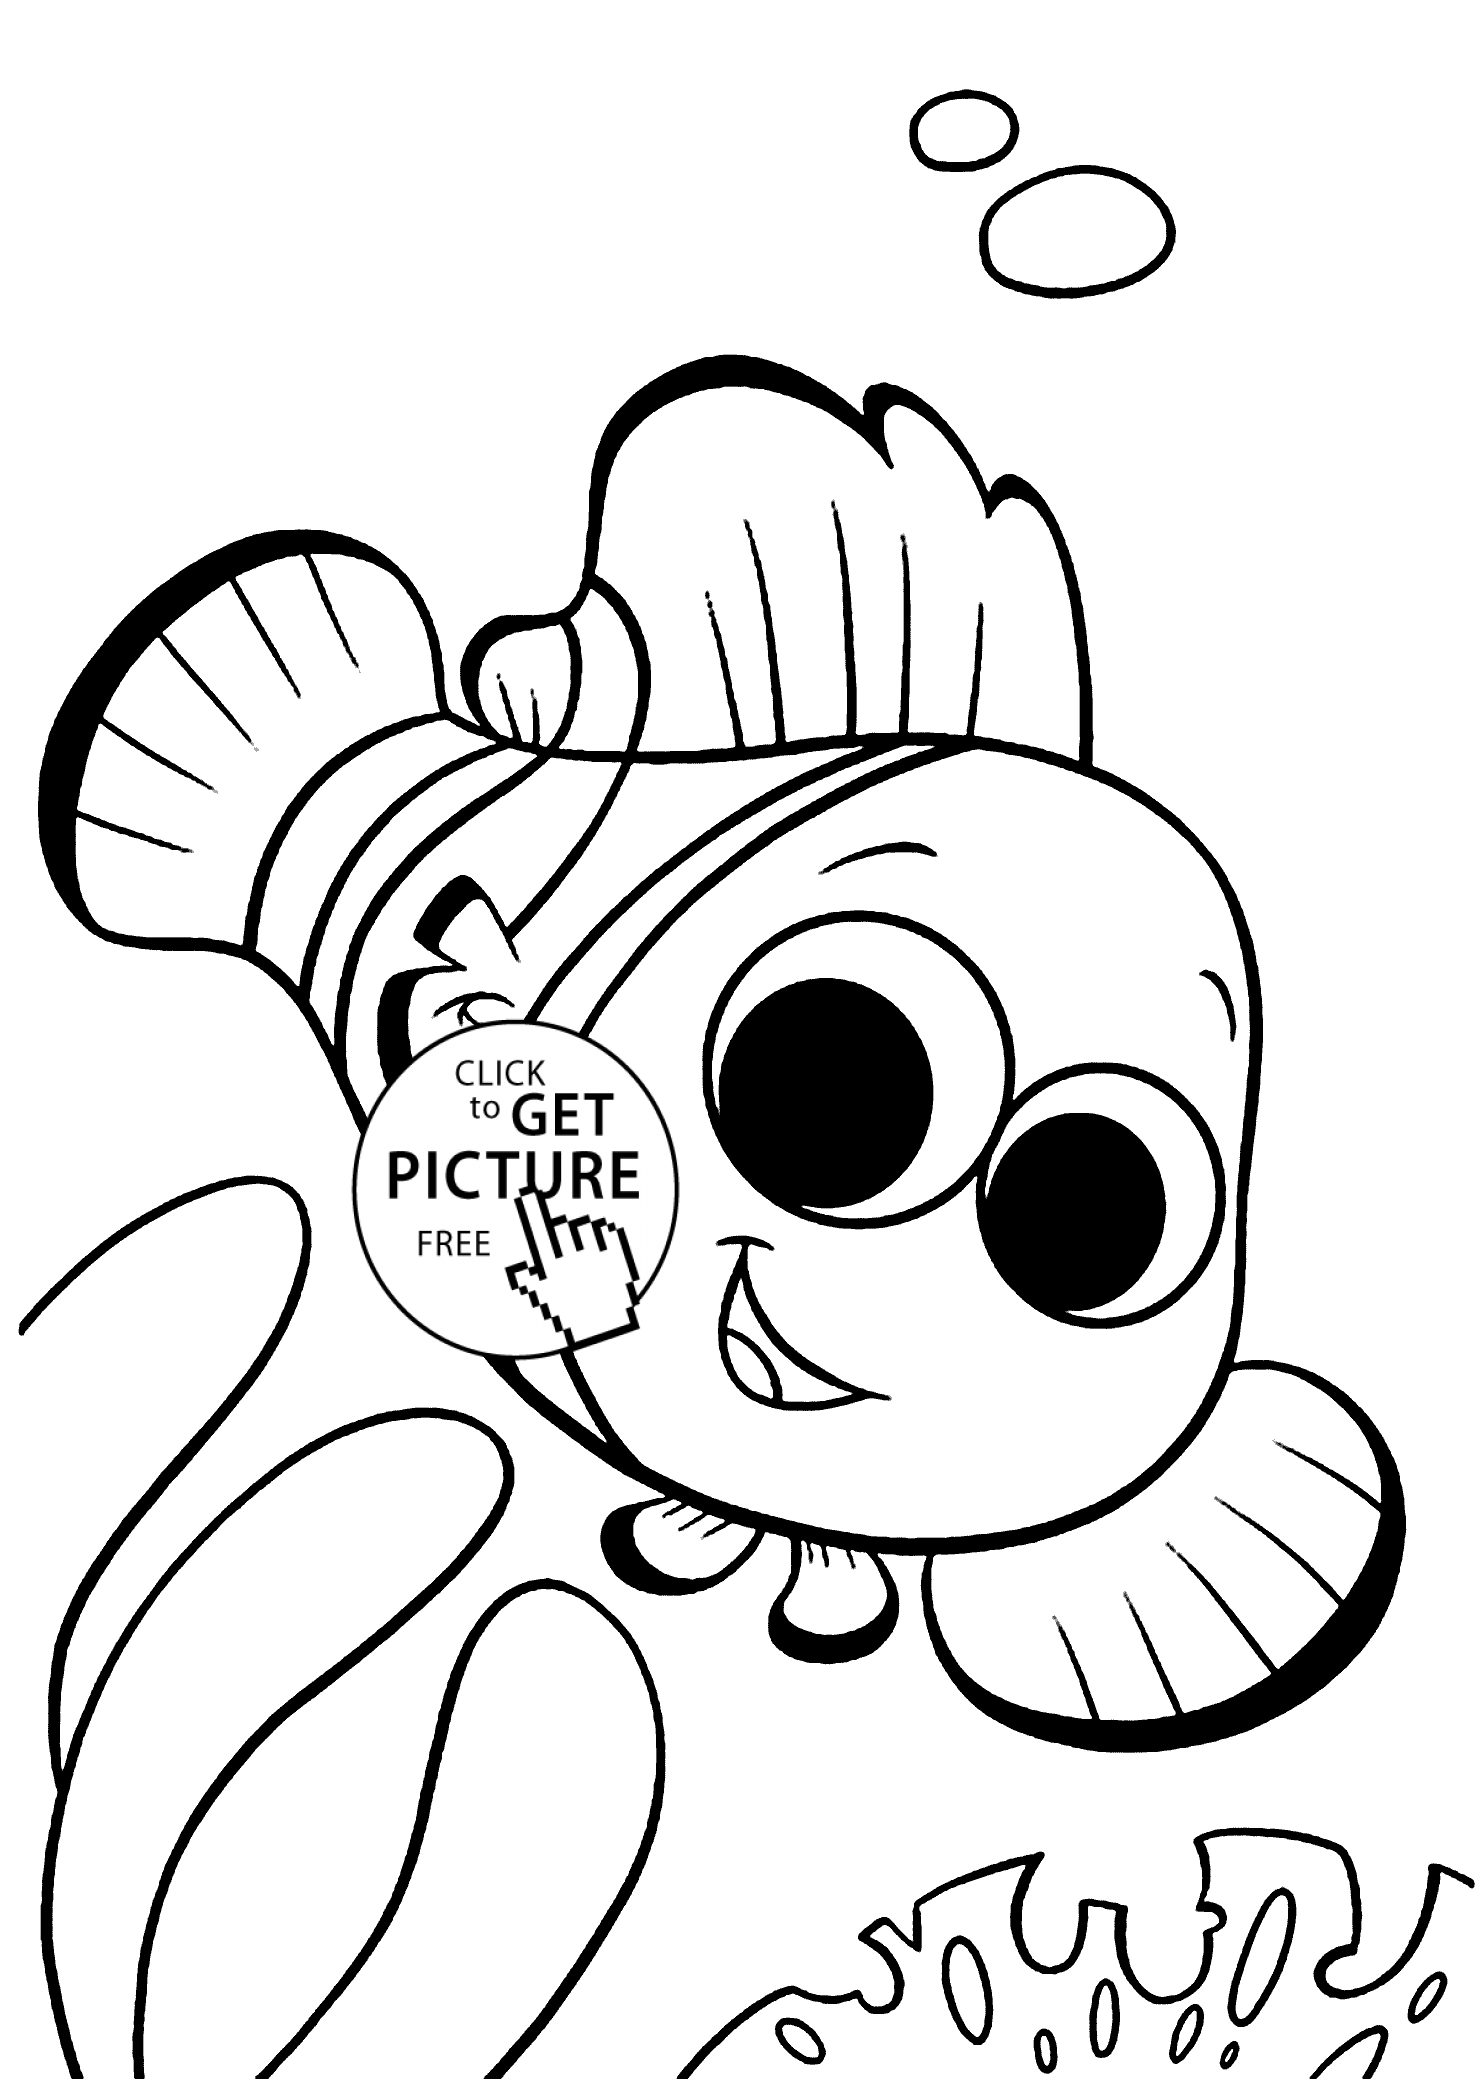 Finding Nemo Black and White Logo - Finding Nemo coloring pages for kids, printable free